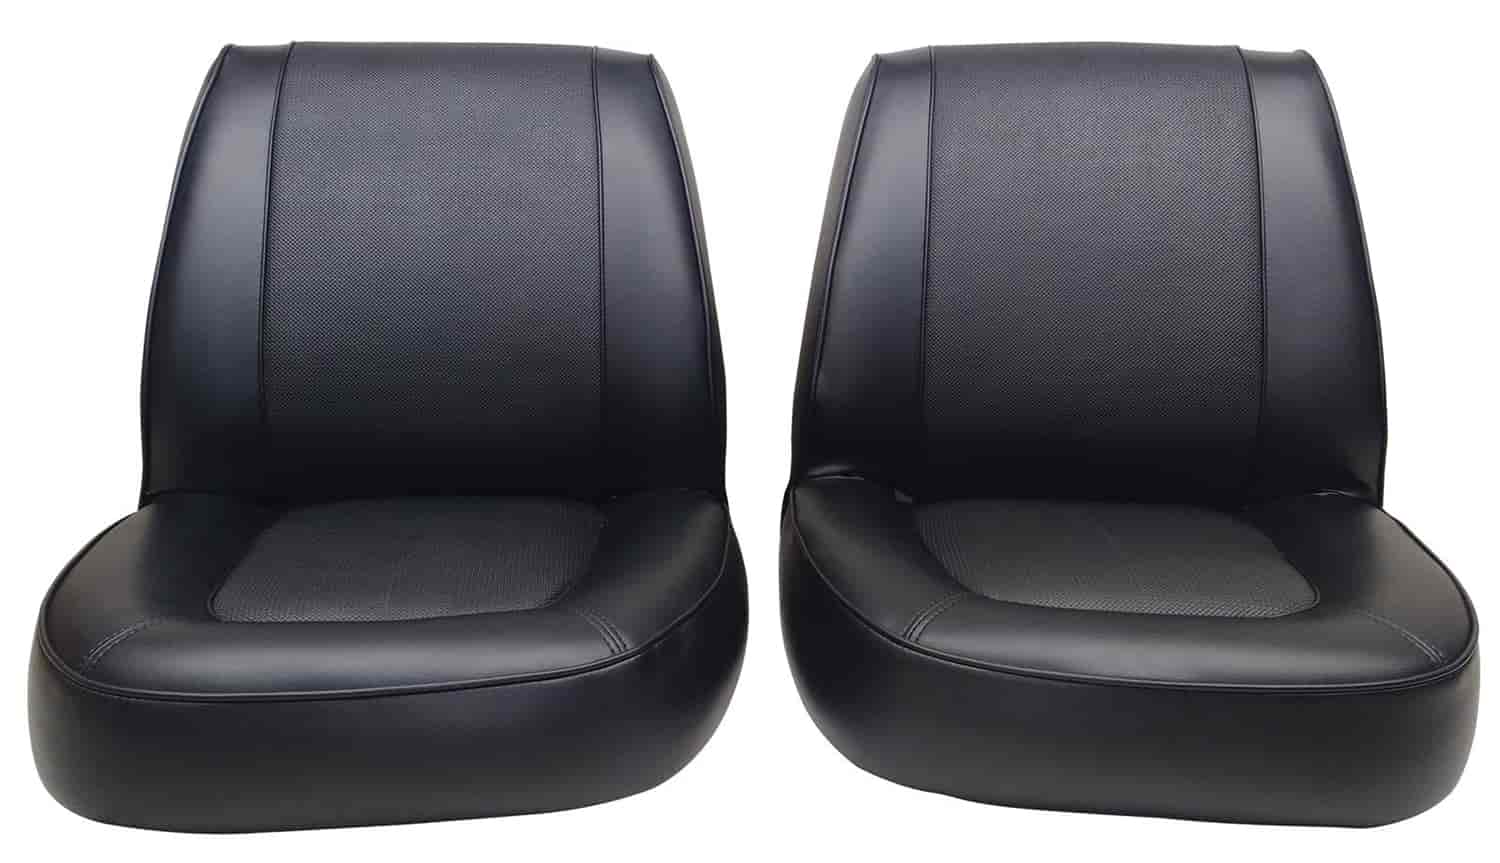 1964 Ford Falcon Futura 2-Door and Ranchero Deluxe Interior Front Bucket Seat Upholstery Set